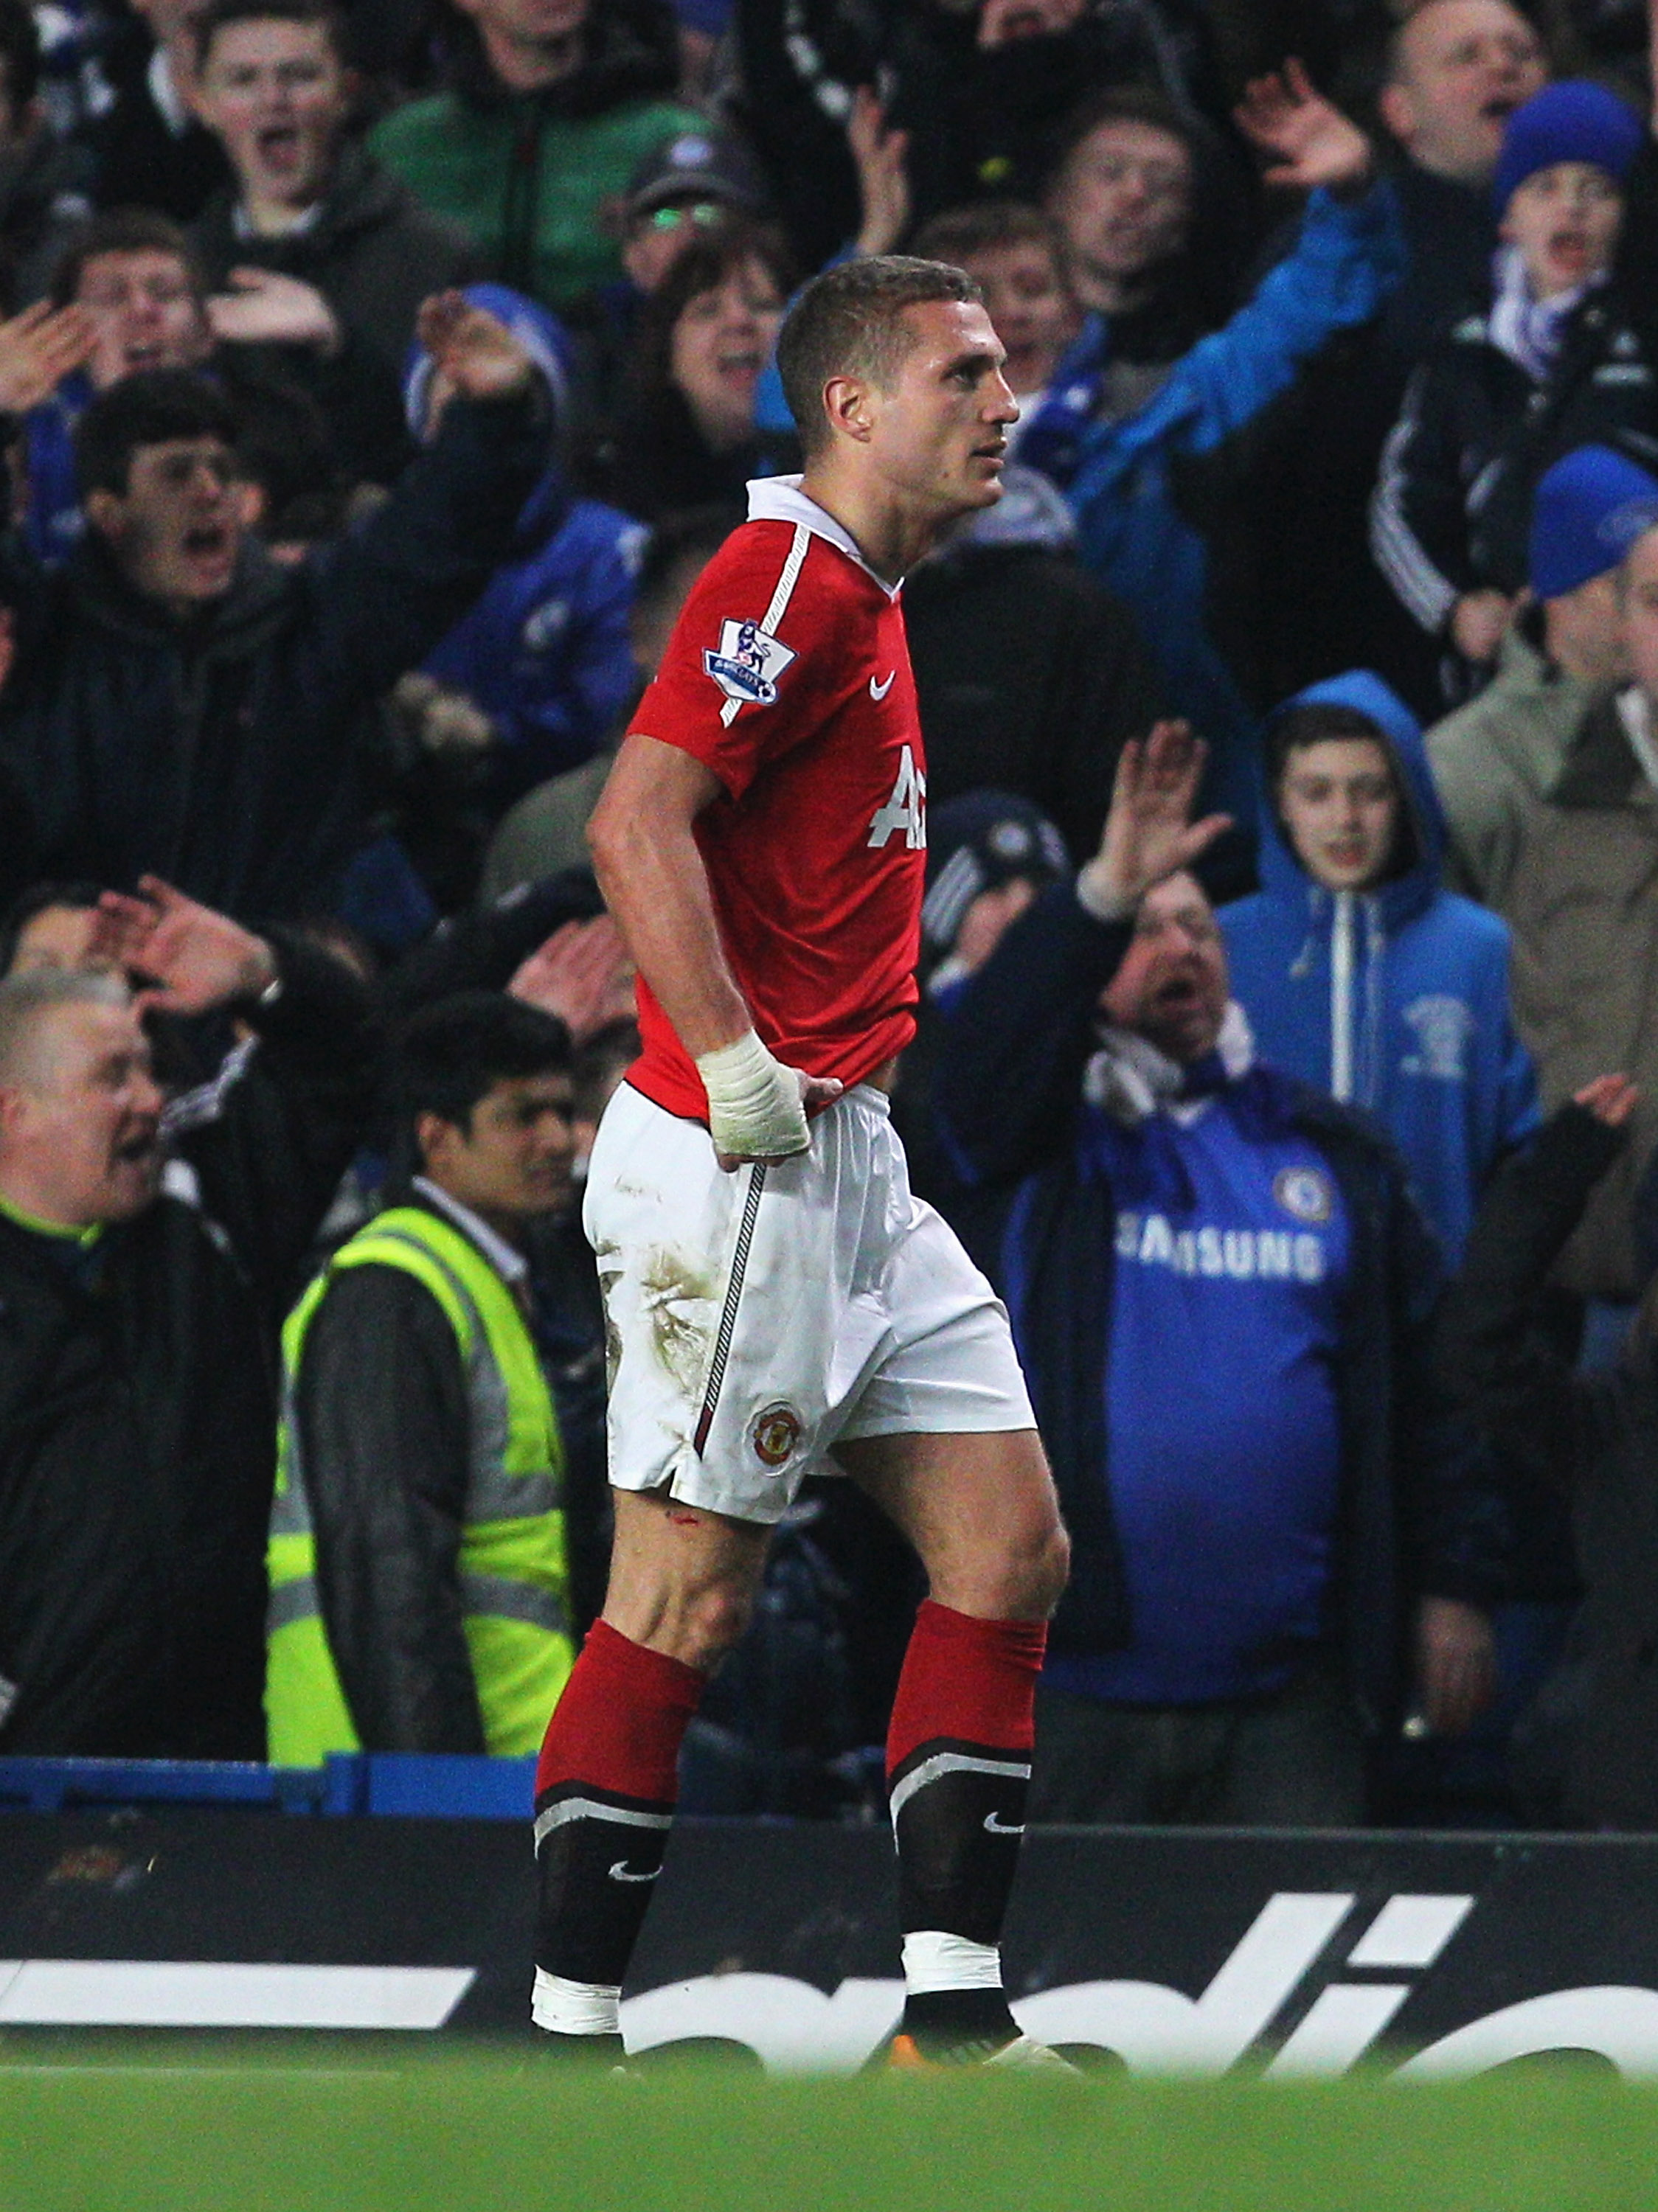 LONDON, ENGLAND - MARCH 01:  Nemanja Vidic of Manchester United walks off after being shown the red card by referee Martin Atkinson during the Barclays Premier League match between Chelsea and Manchester United at Stamford Bridge on March 1, 2011 in Londo